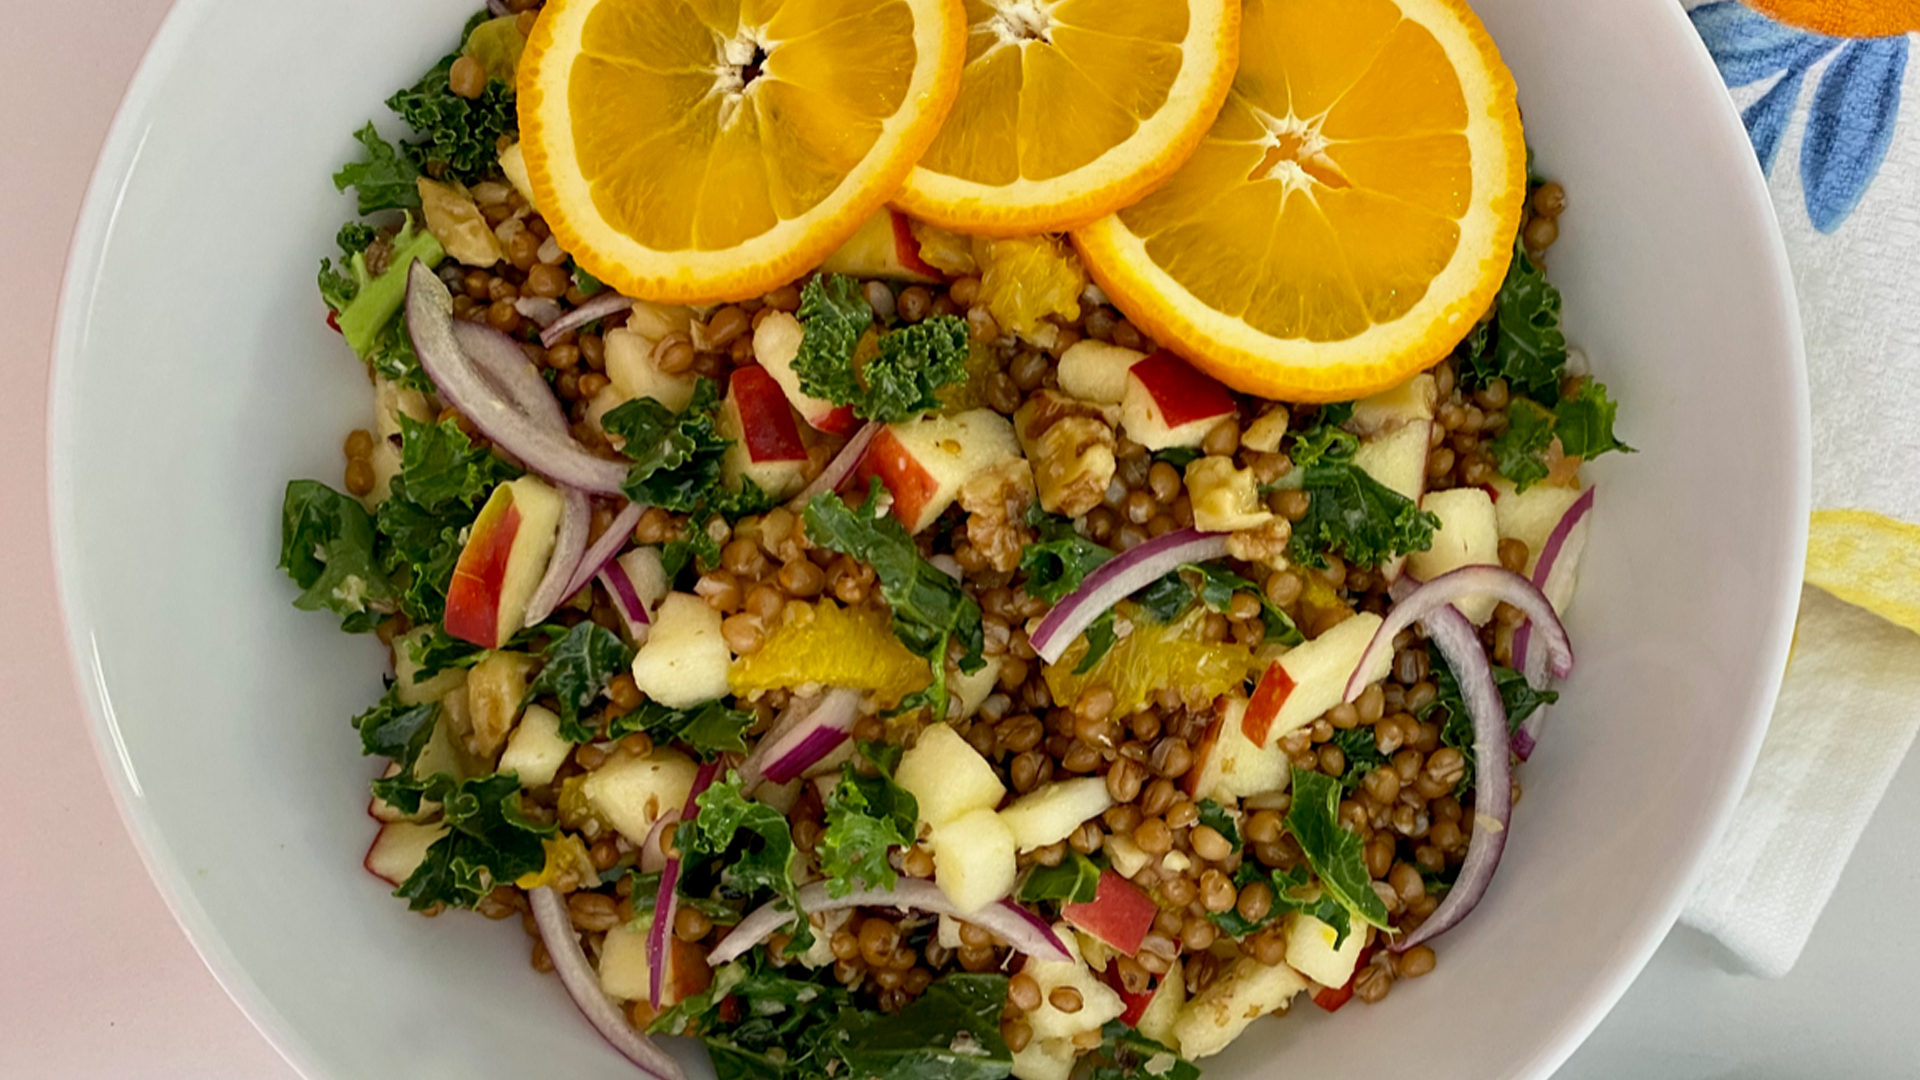 Wheat berry salad with citrus dressing